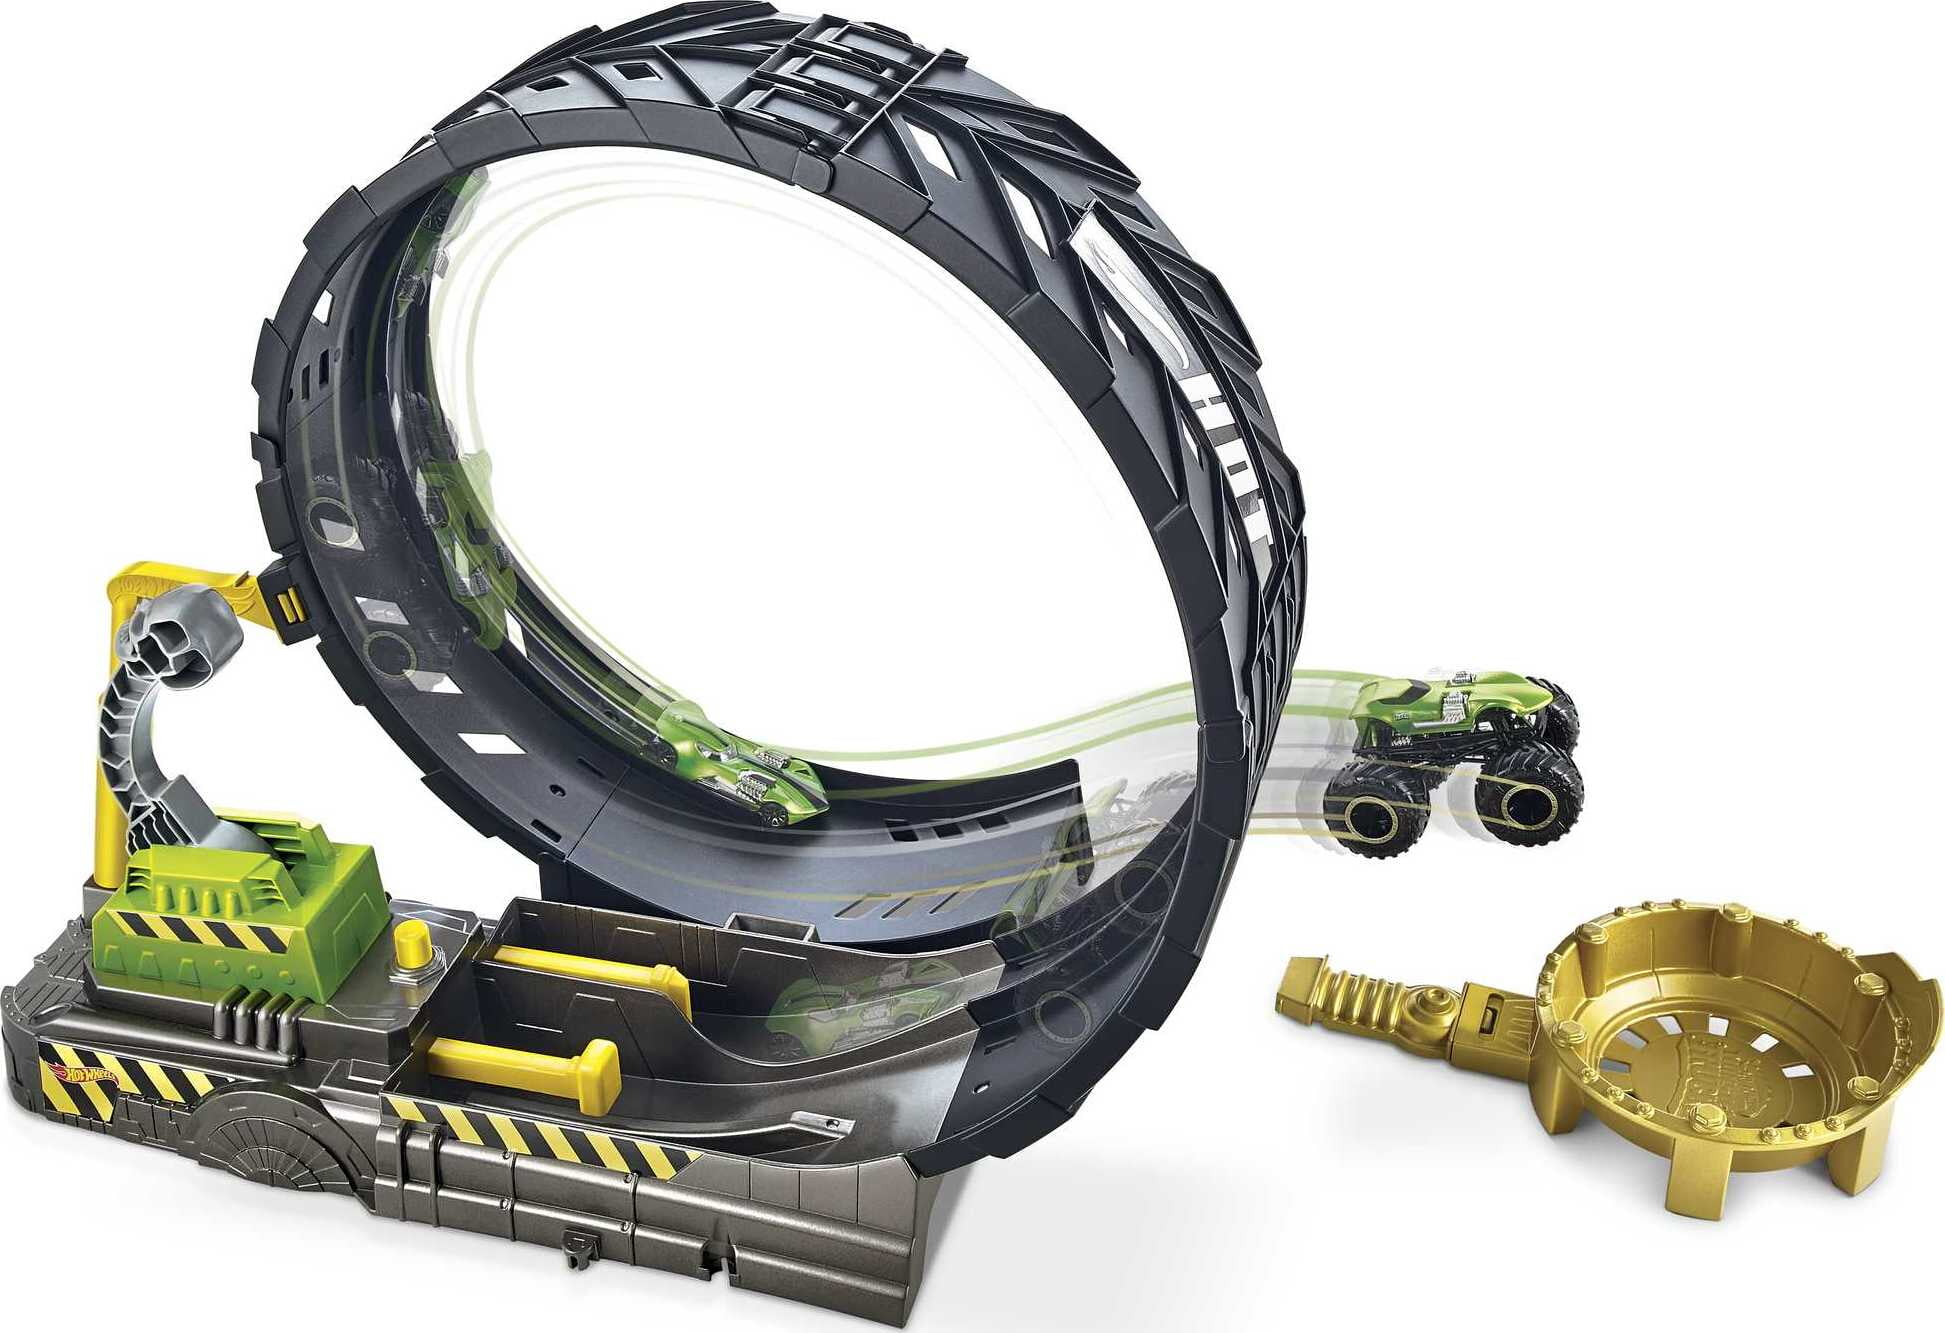 Hot Wheels Monster Trucks Epic Loop Challenge Playset with 1 Toy Truck & 1  Car in 1:64 Scale 